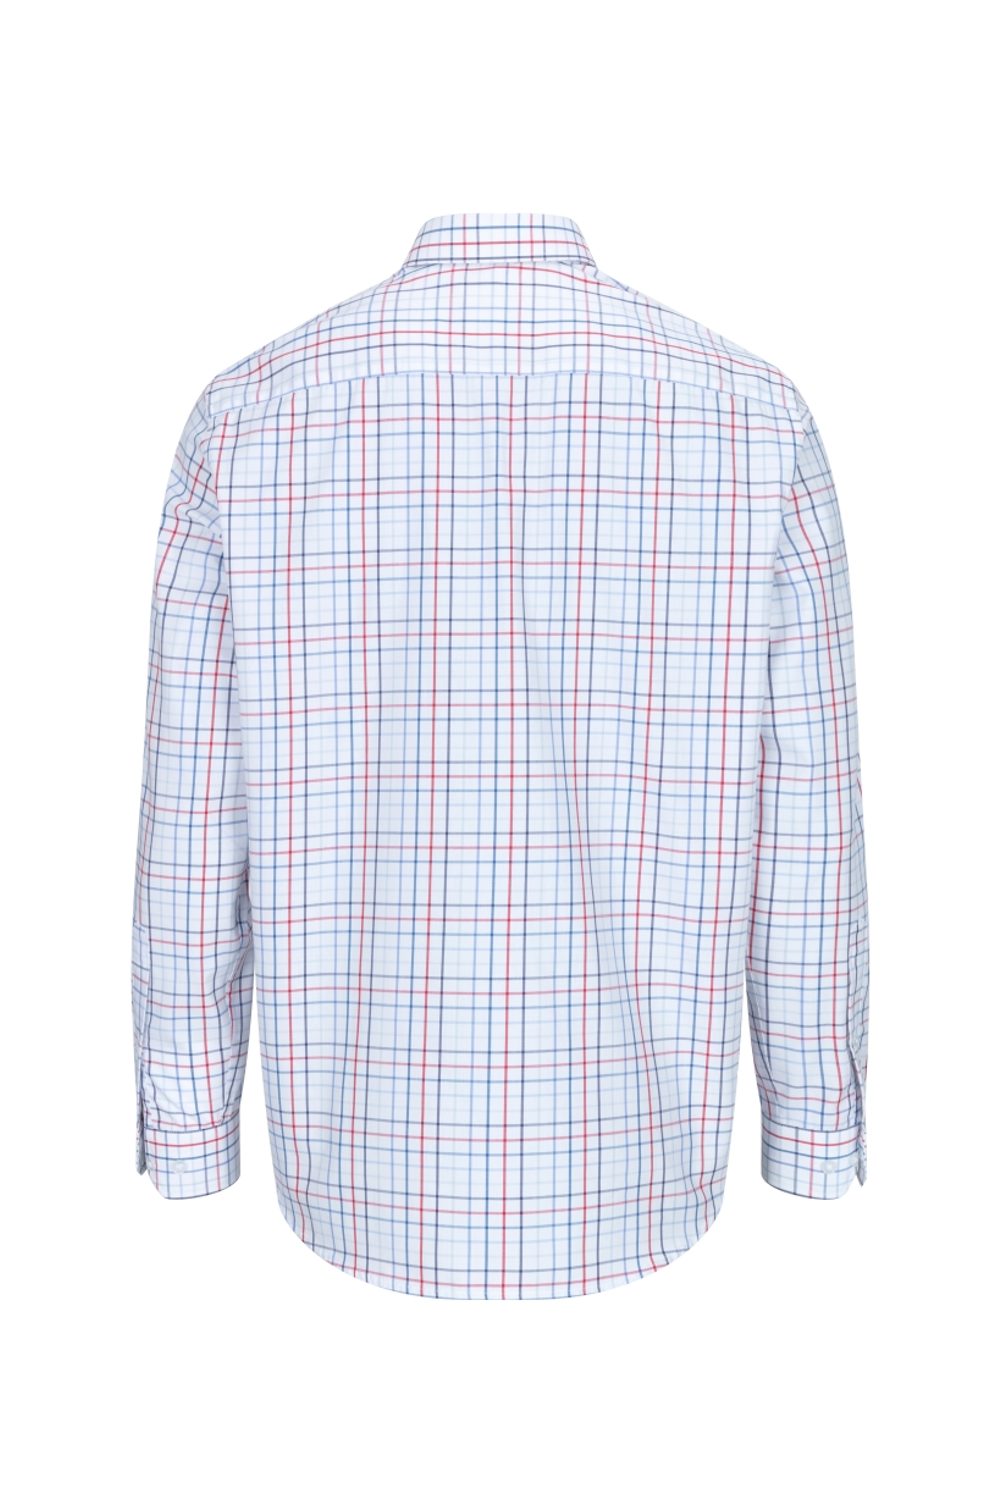 Hoggs of Fife Turnberry Cotton Twill Shirt in white/red/navy